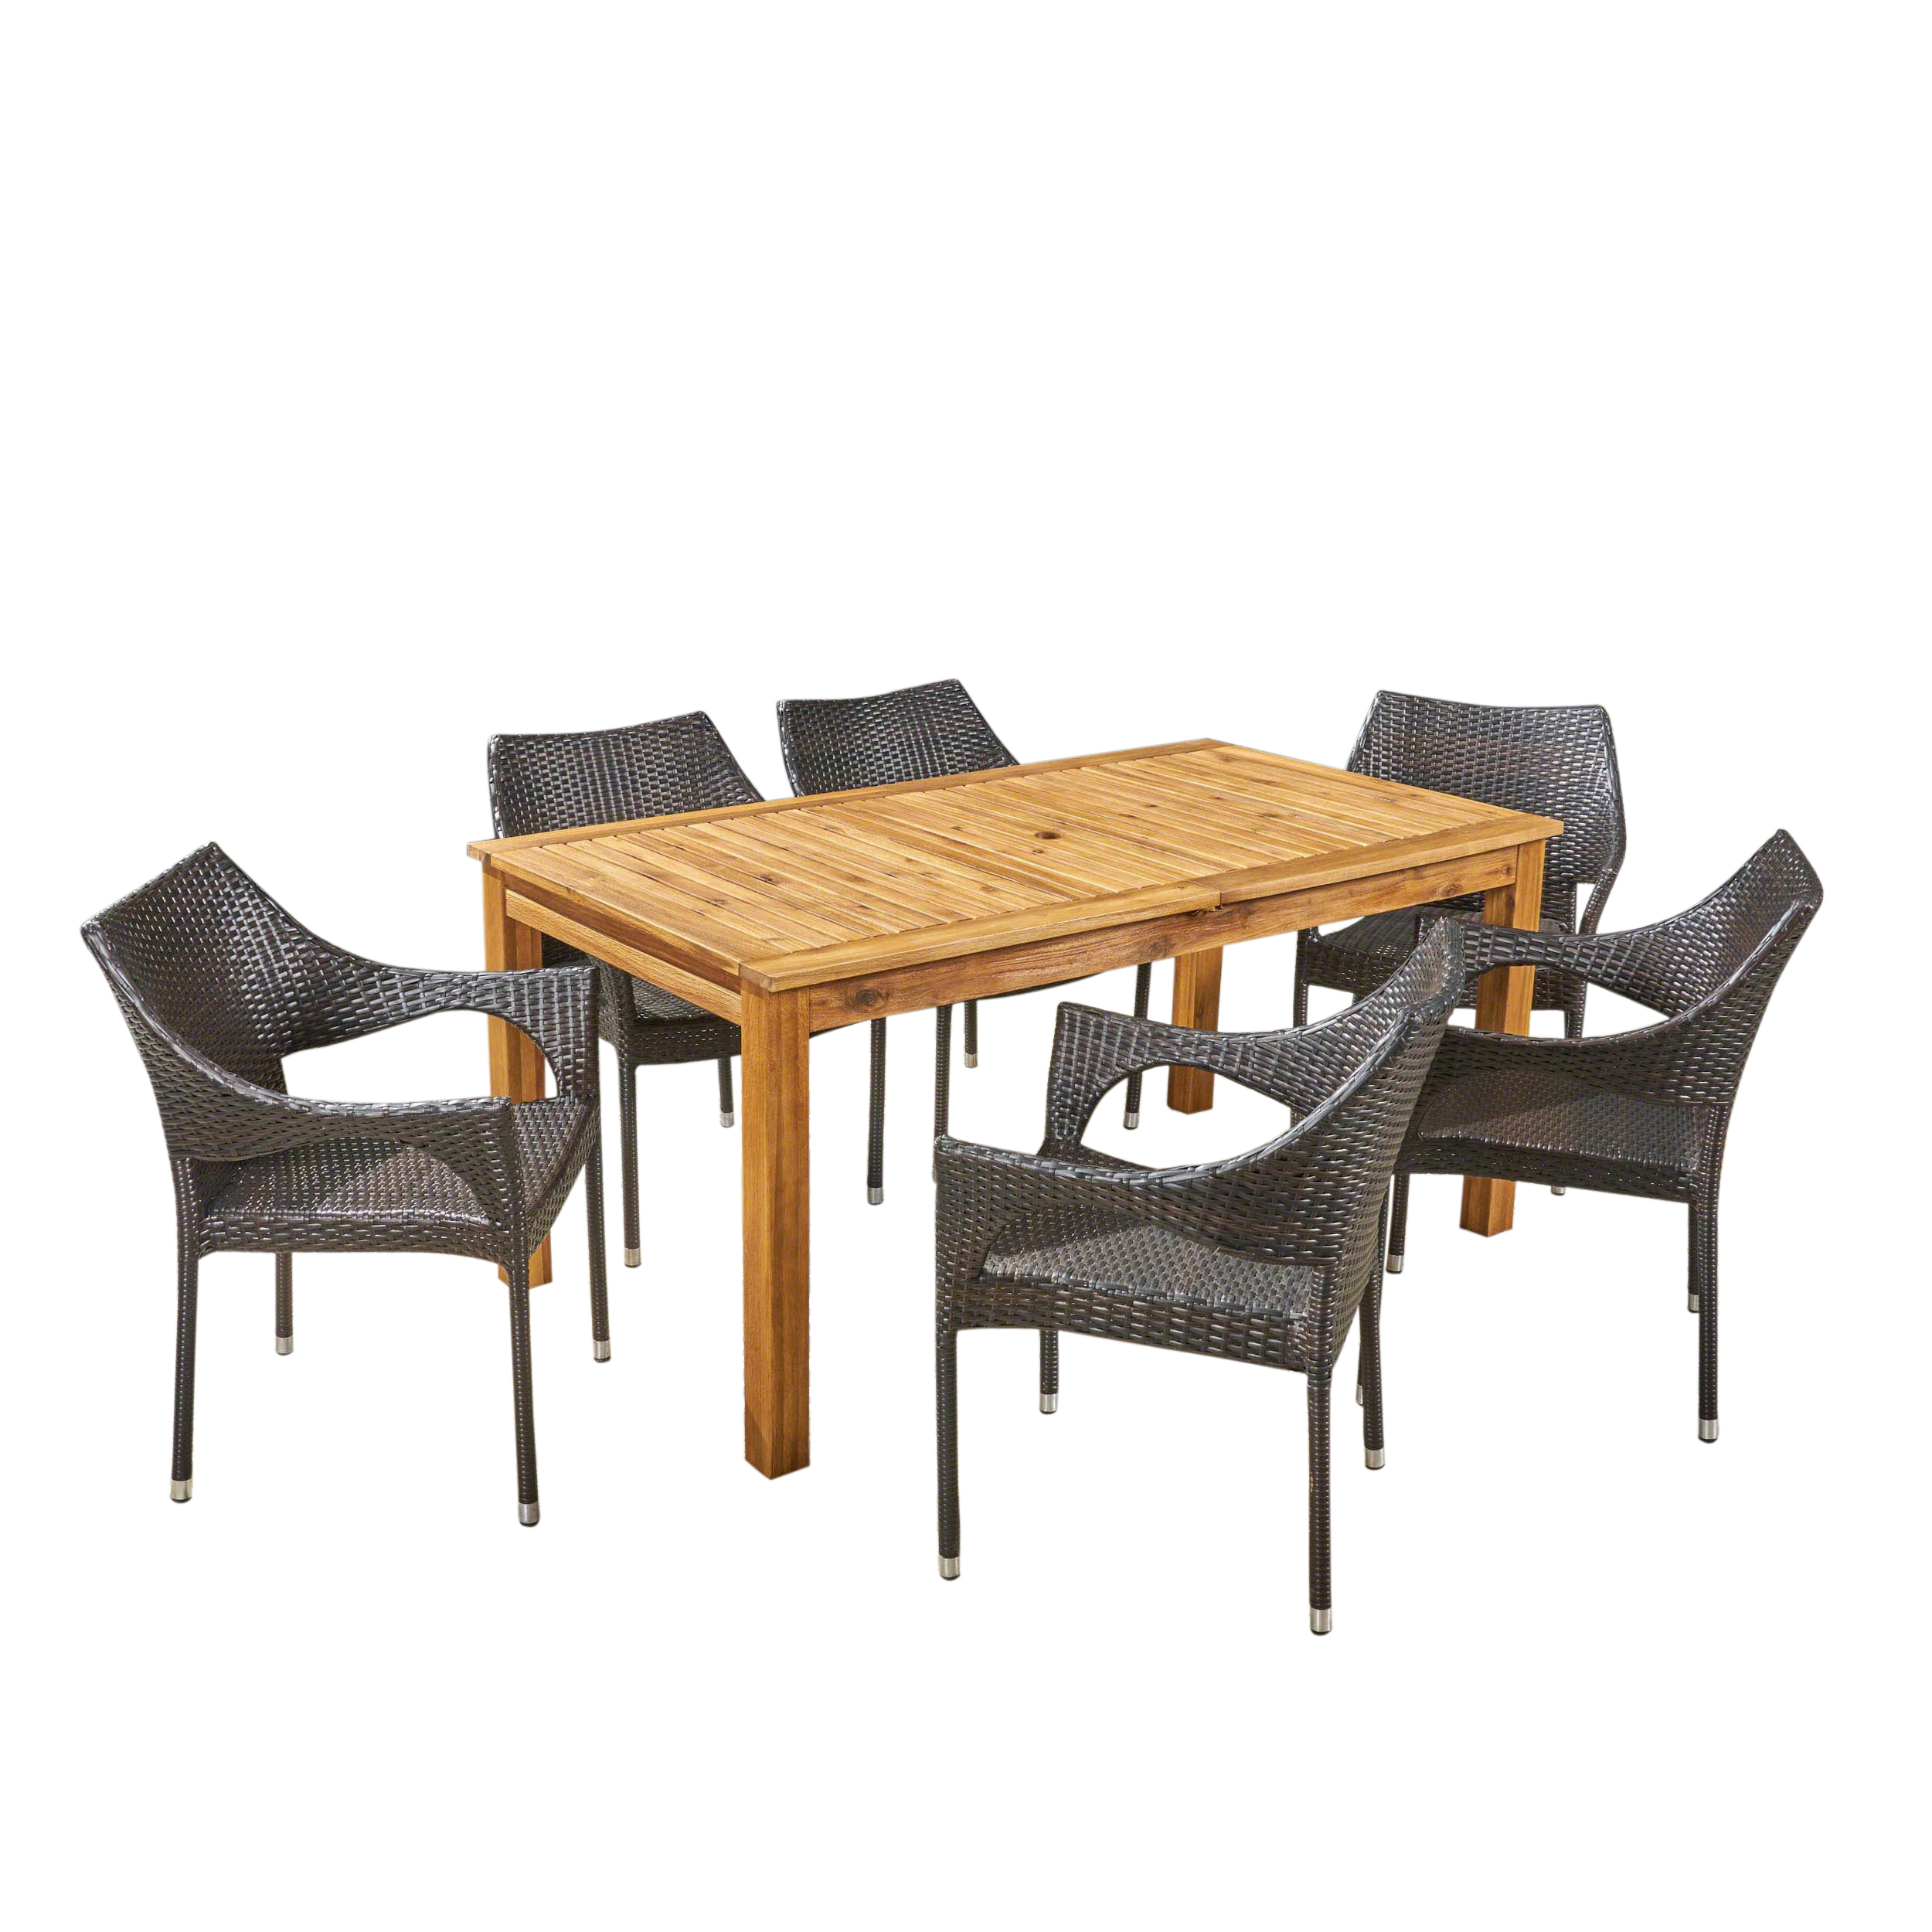 Amayah Outdoor 7 Piece Wood and Wicker Expandable Dining Set, Sandblast Natural Stained, Multi Brown - image 1 of 9